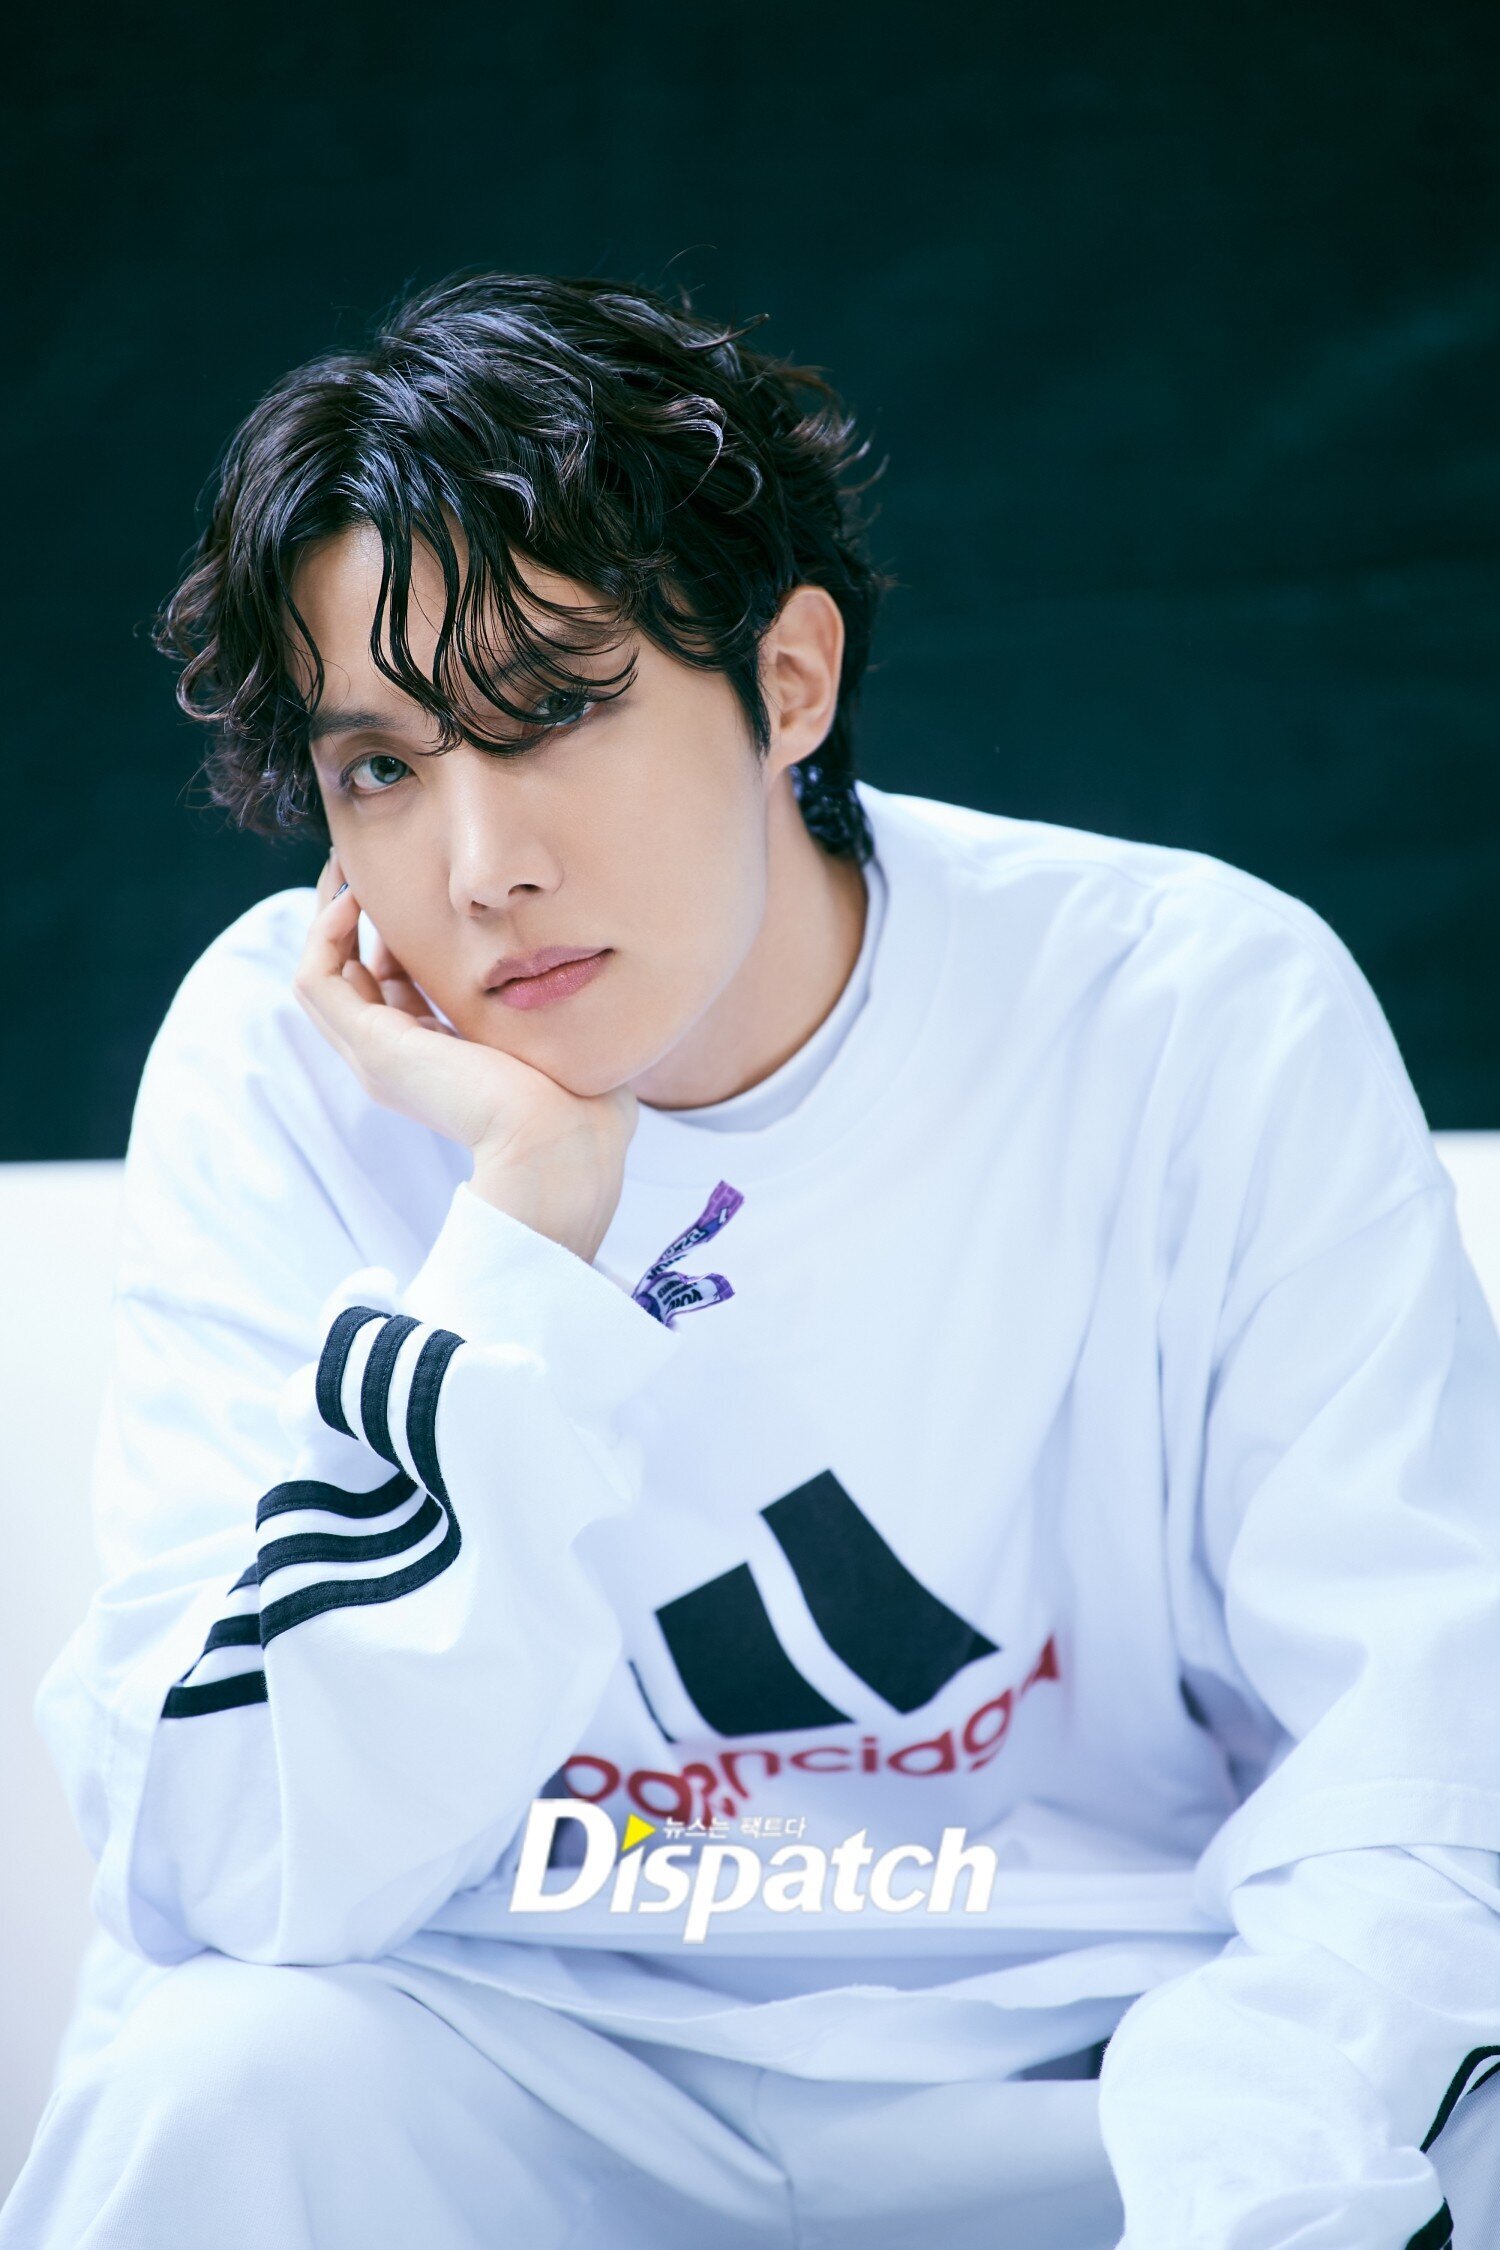 201218 BTS J-Hope - Dicon Photoshoot by Naver x Dispatch